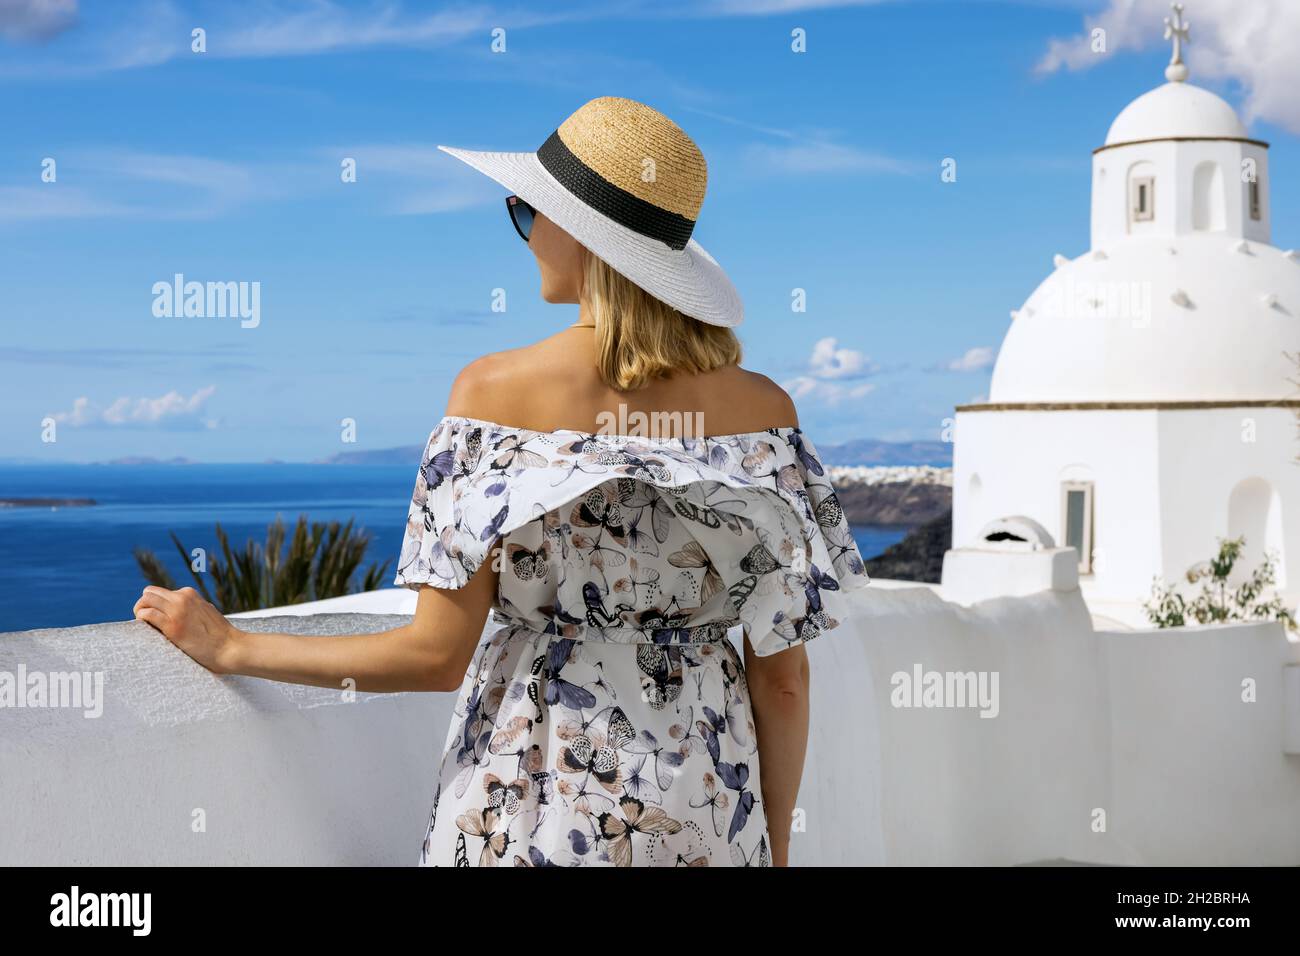 woman with straw hat and dress on summer vacation in Santorini island. Greece Stock Photo